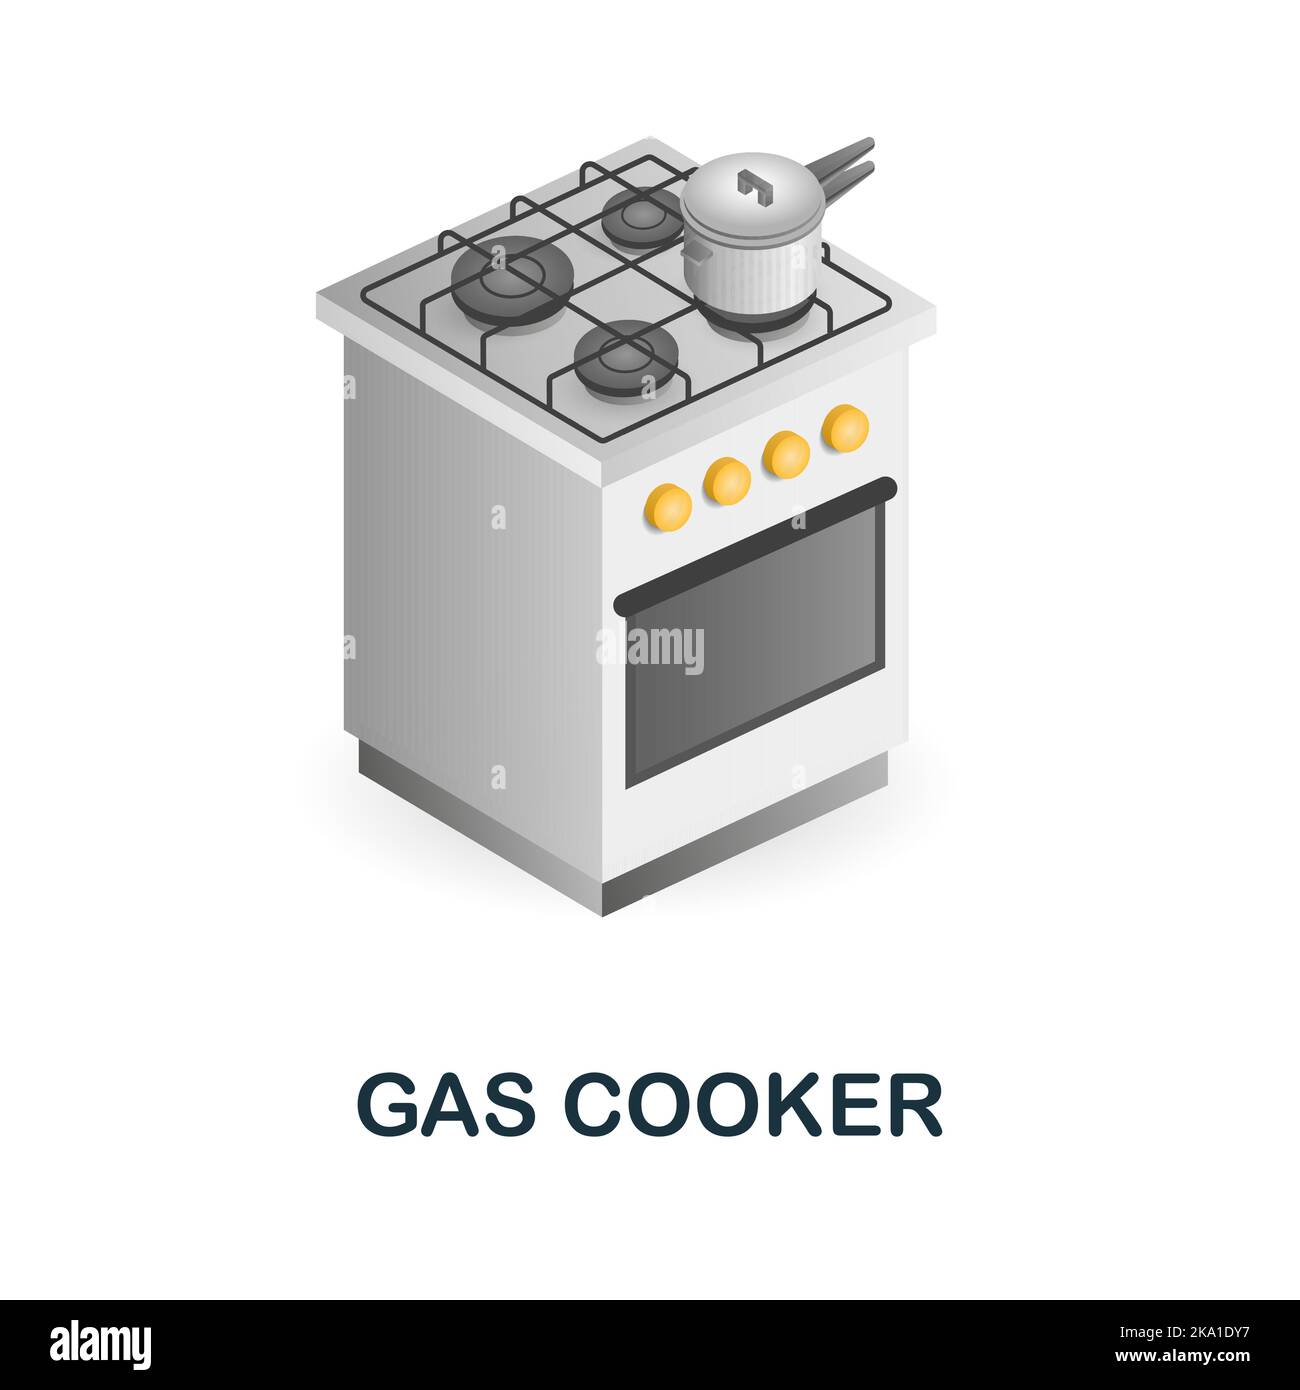 Gas Cooker icon. 3d illustration from kitchen supplies collection. Creative Gas Cooker 3d icon for web design, templates, infographics and more Stock Vector